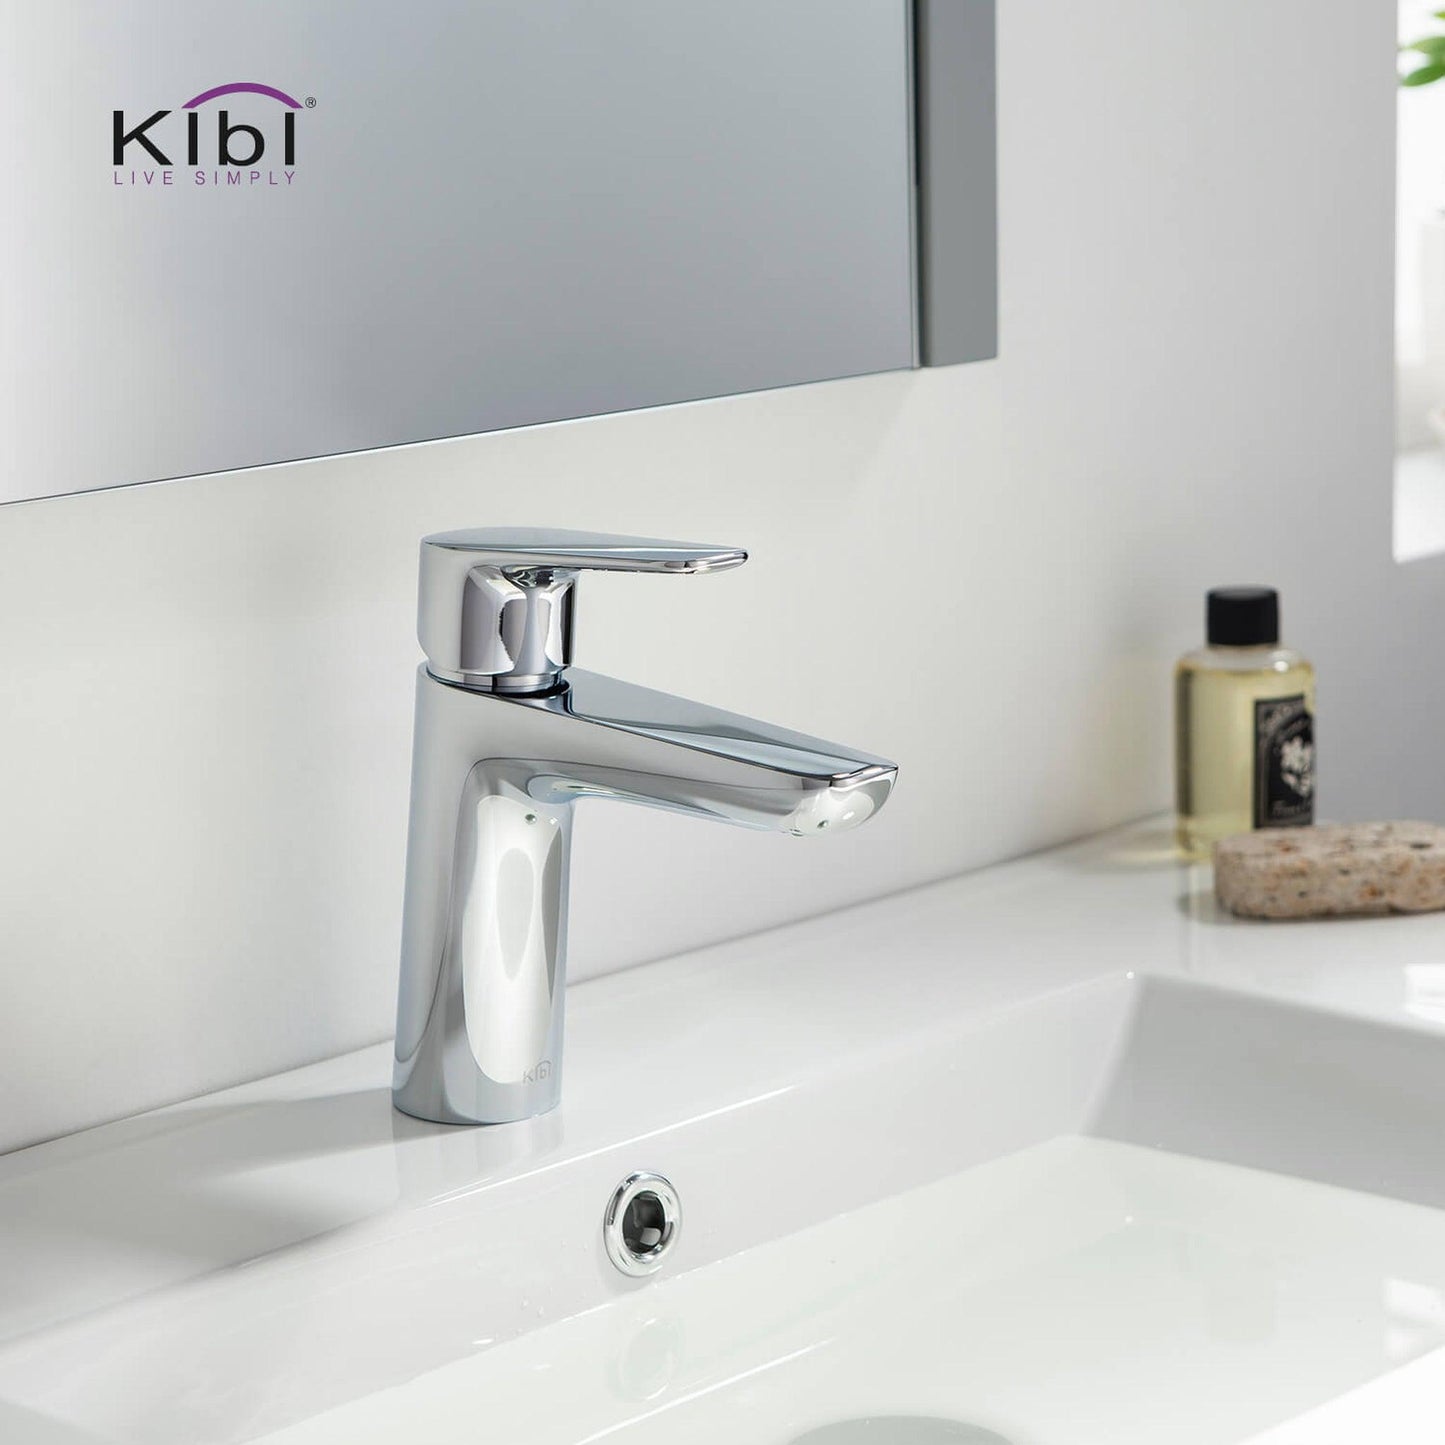 KIBI Harmony Single Handle Chrome Solid Brass Bathroom Sink Faucet With Pop-Up Drain Stopper Small Cover With Overflow